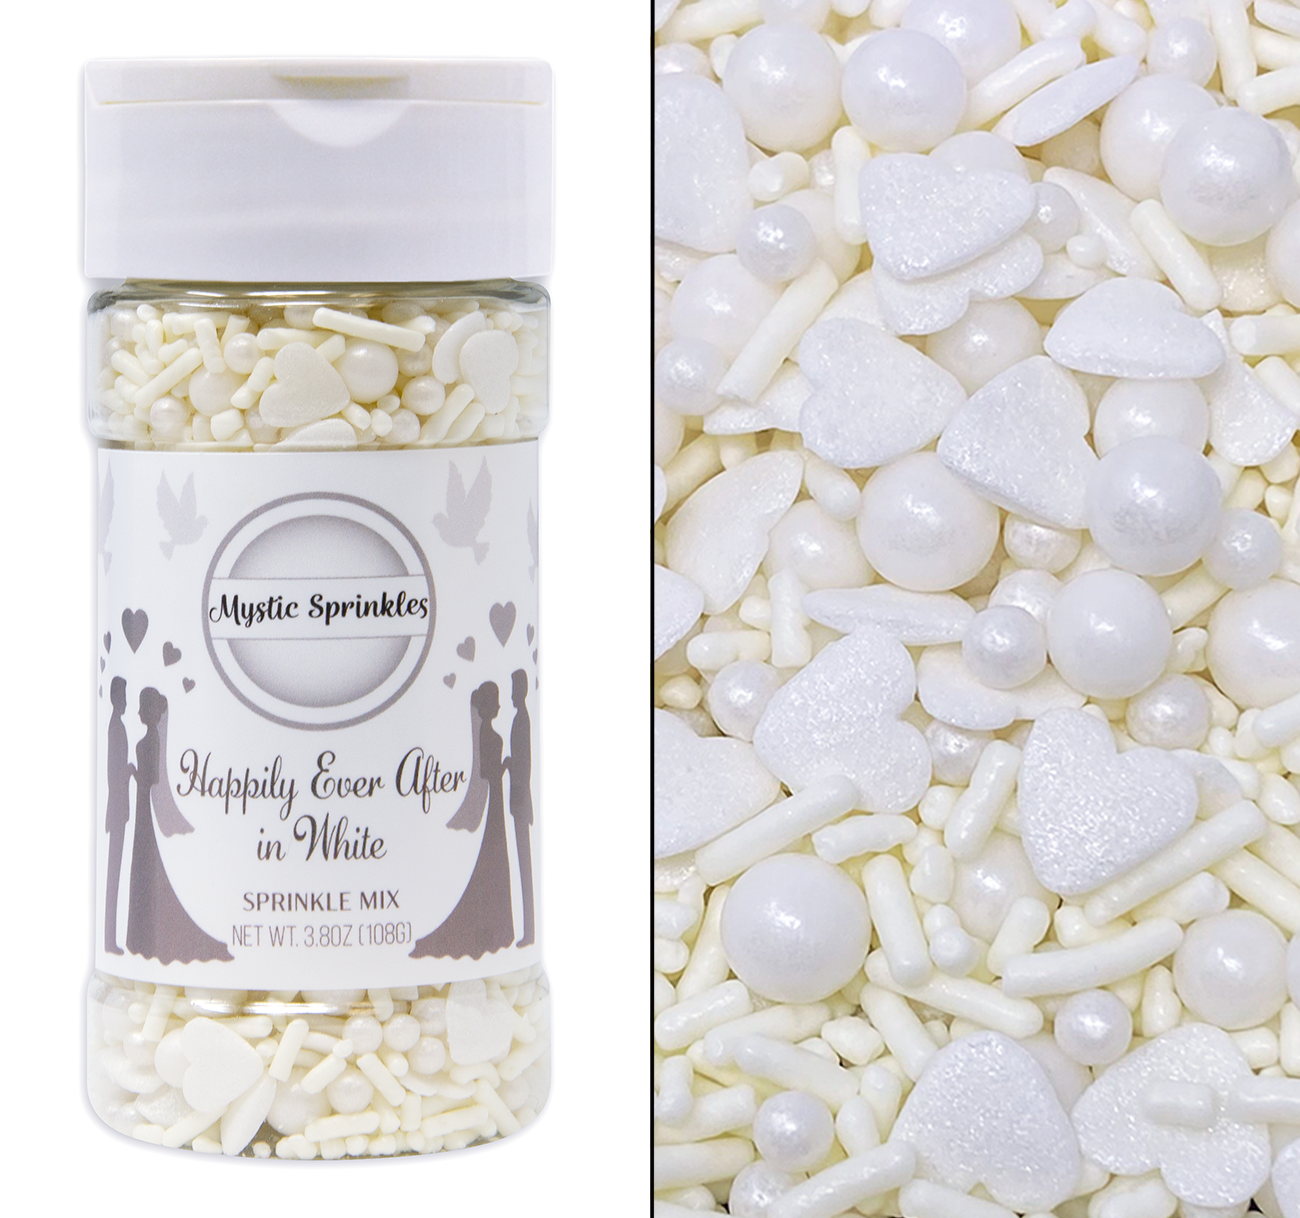 Happily Ever After in White Sprinkle Mix 3.8oz